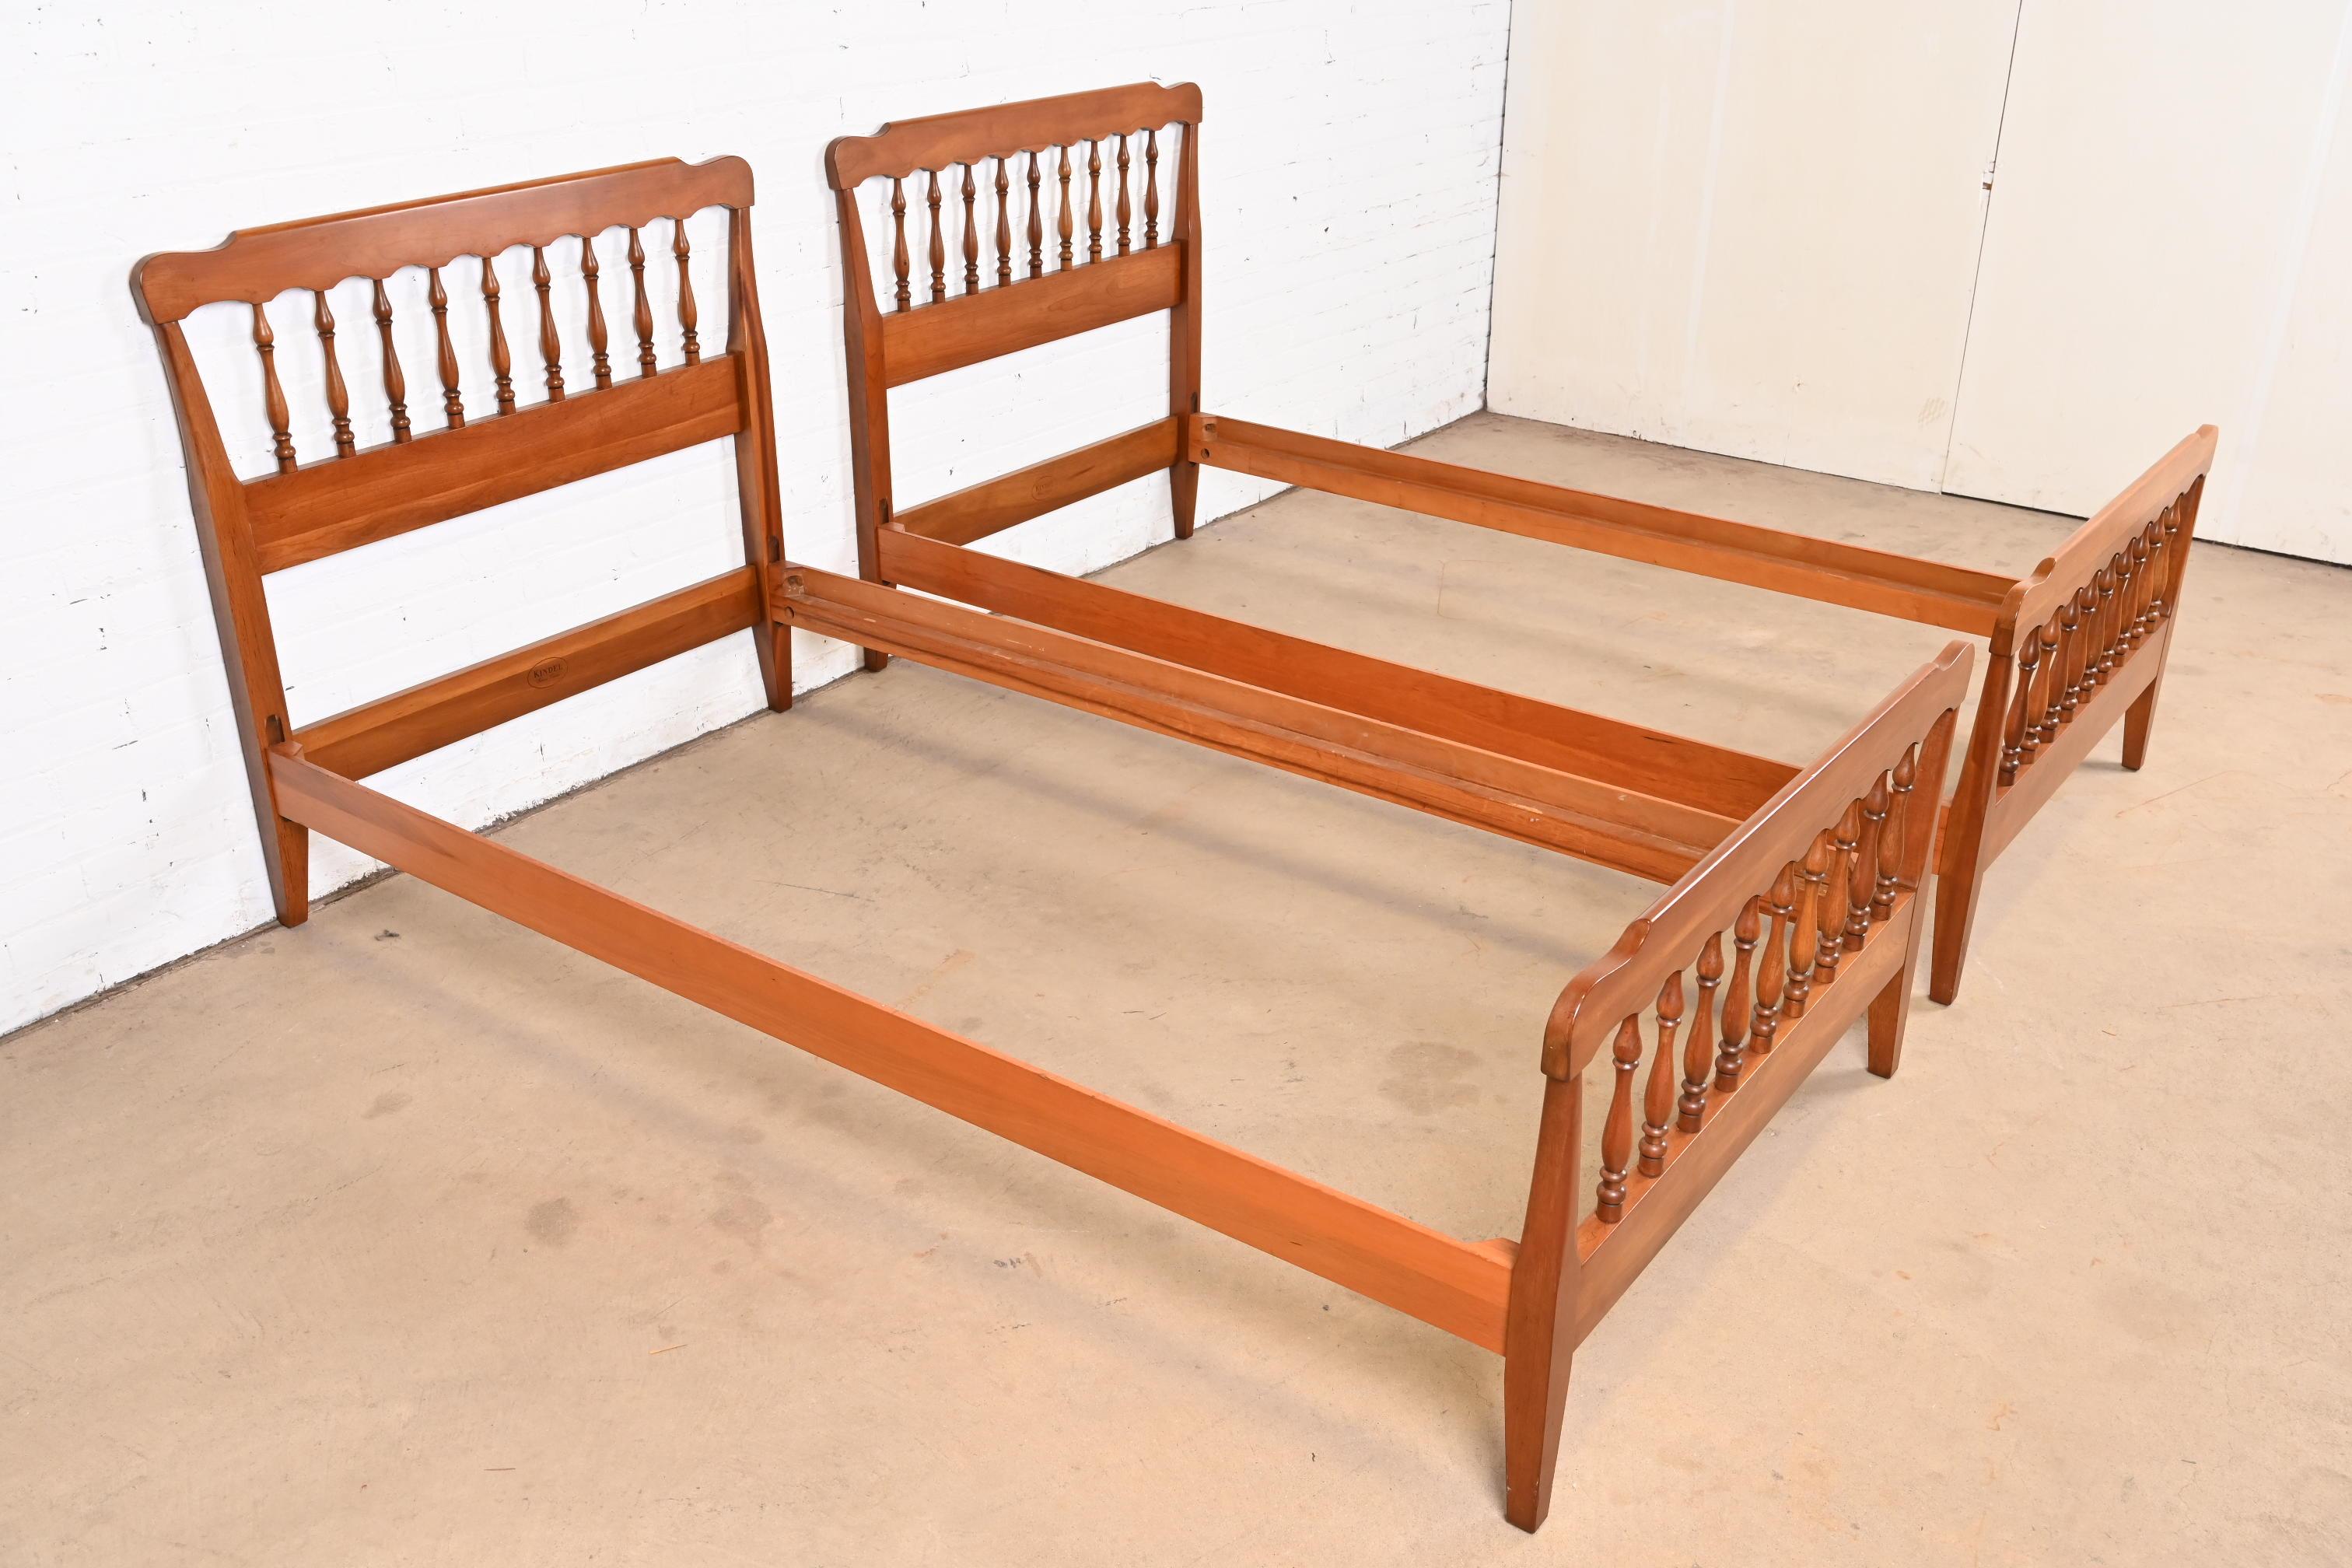 Kindel Furniture American Colonial Carved Cherry Wood Twin Size Spindle Beds In Good Condition For Sale In South Bend, IN